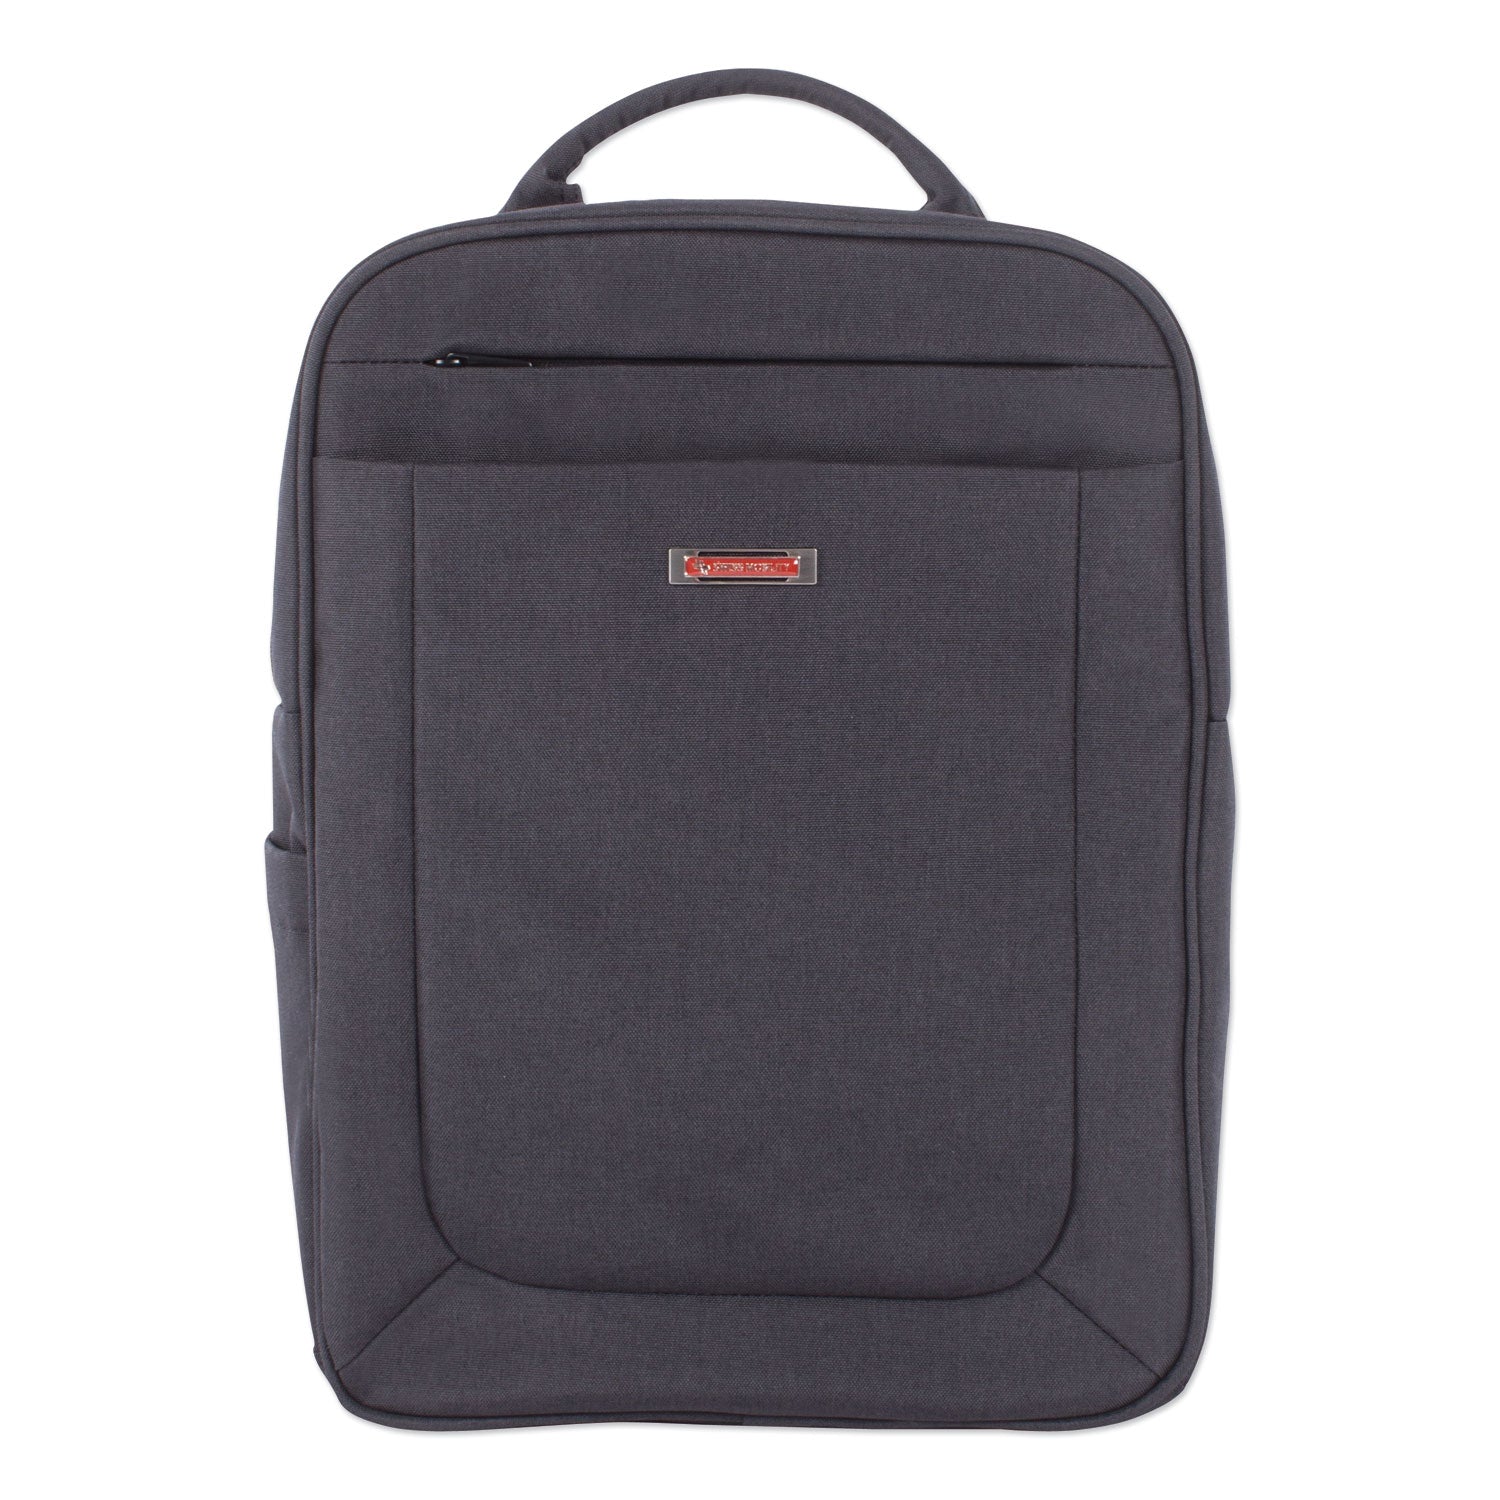 cadence-2-section-business-backpack-fits-devices-up-to-156-polyester-6-x-6-x-17-charcoal_swzbkp1012smch - 1